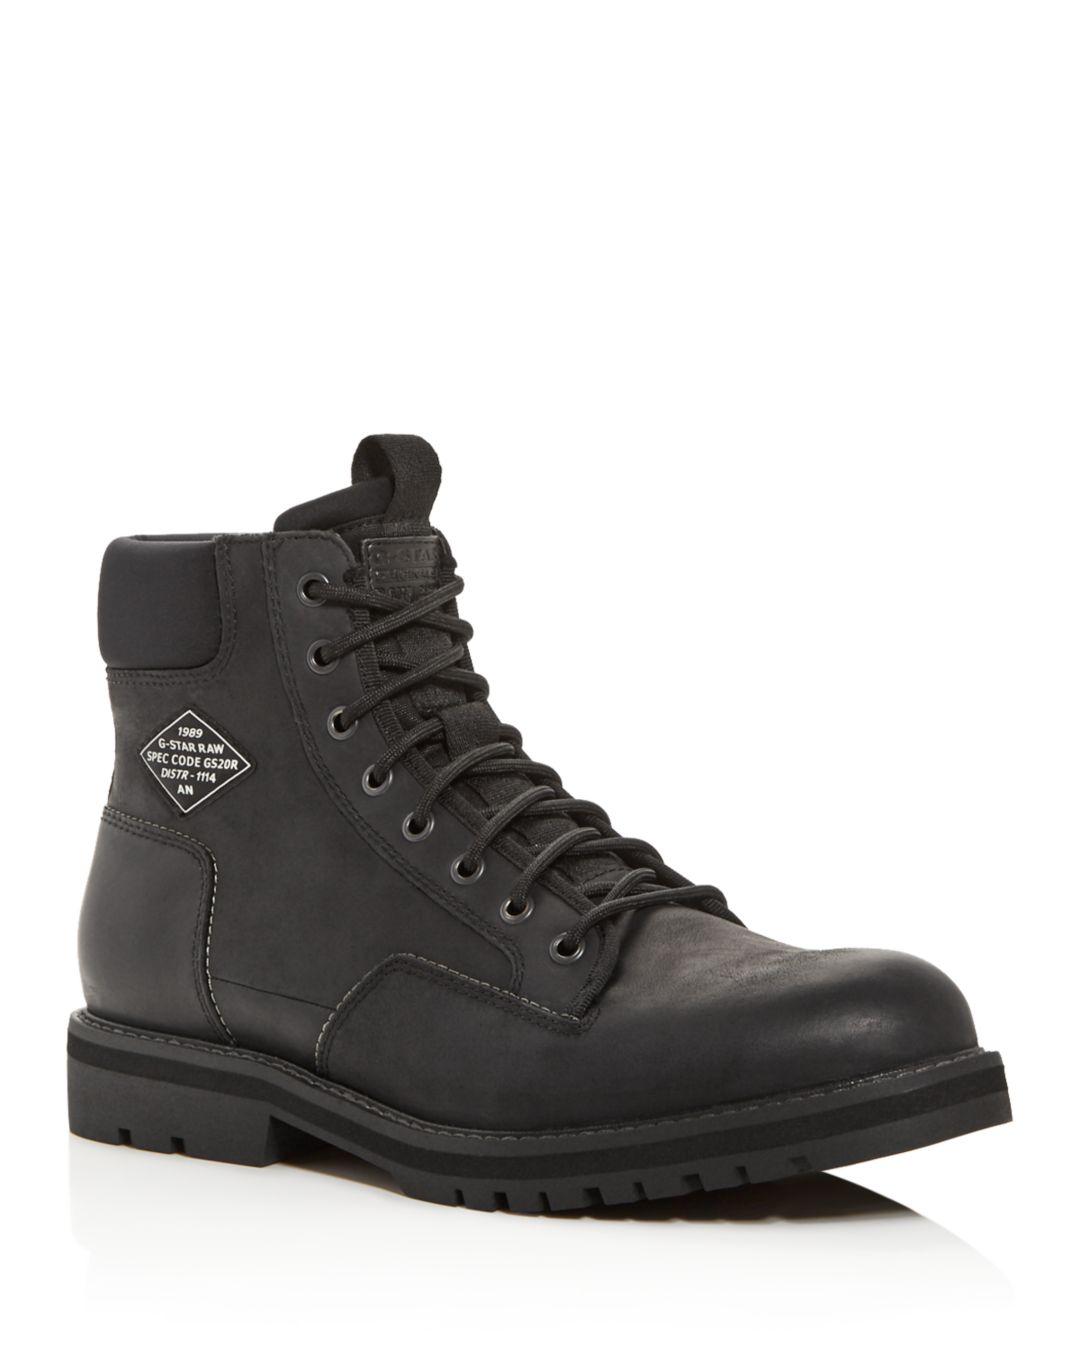 G-Star RAW G - Star Raw Men's Premium Powell Leather Boots in Black for Men  - Lyst